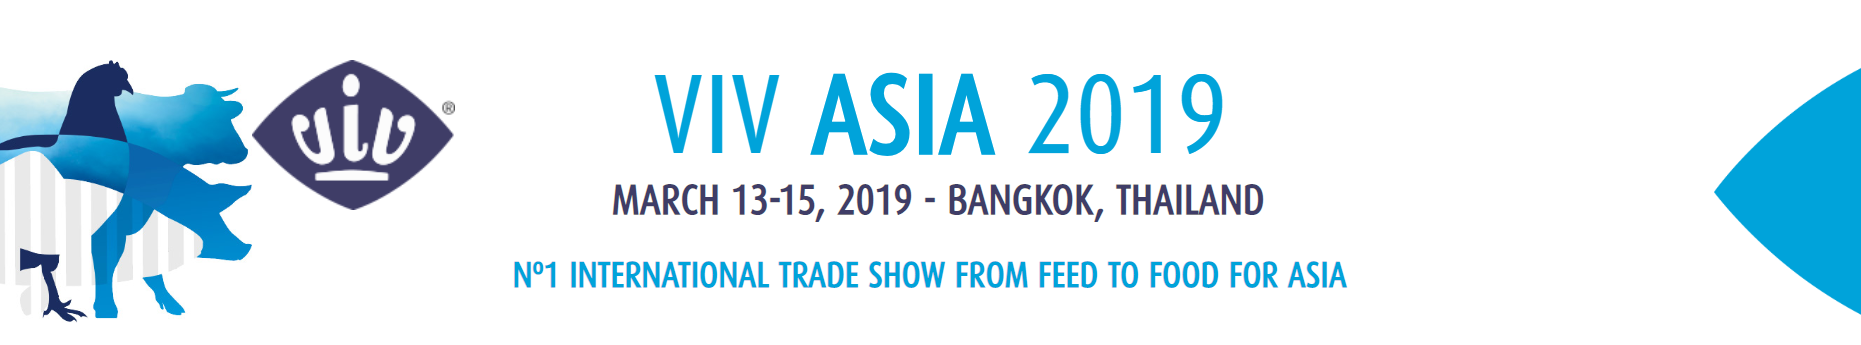 Connect with Genesus at VIV Asia 2019 - Booth H100-3019